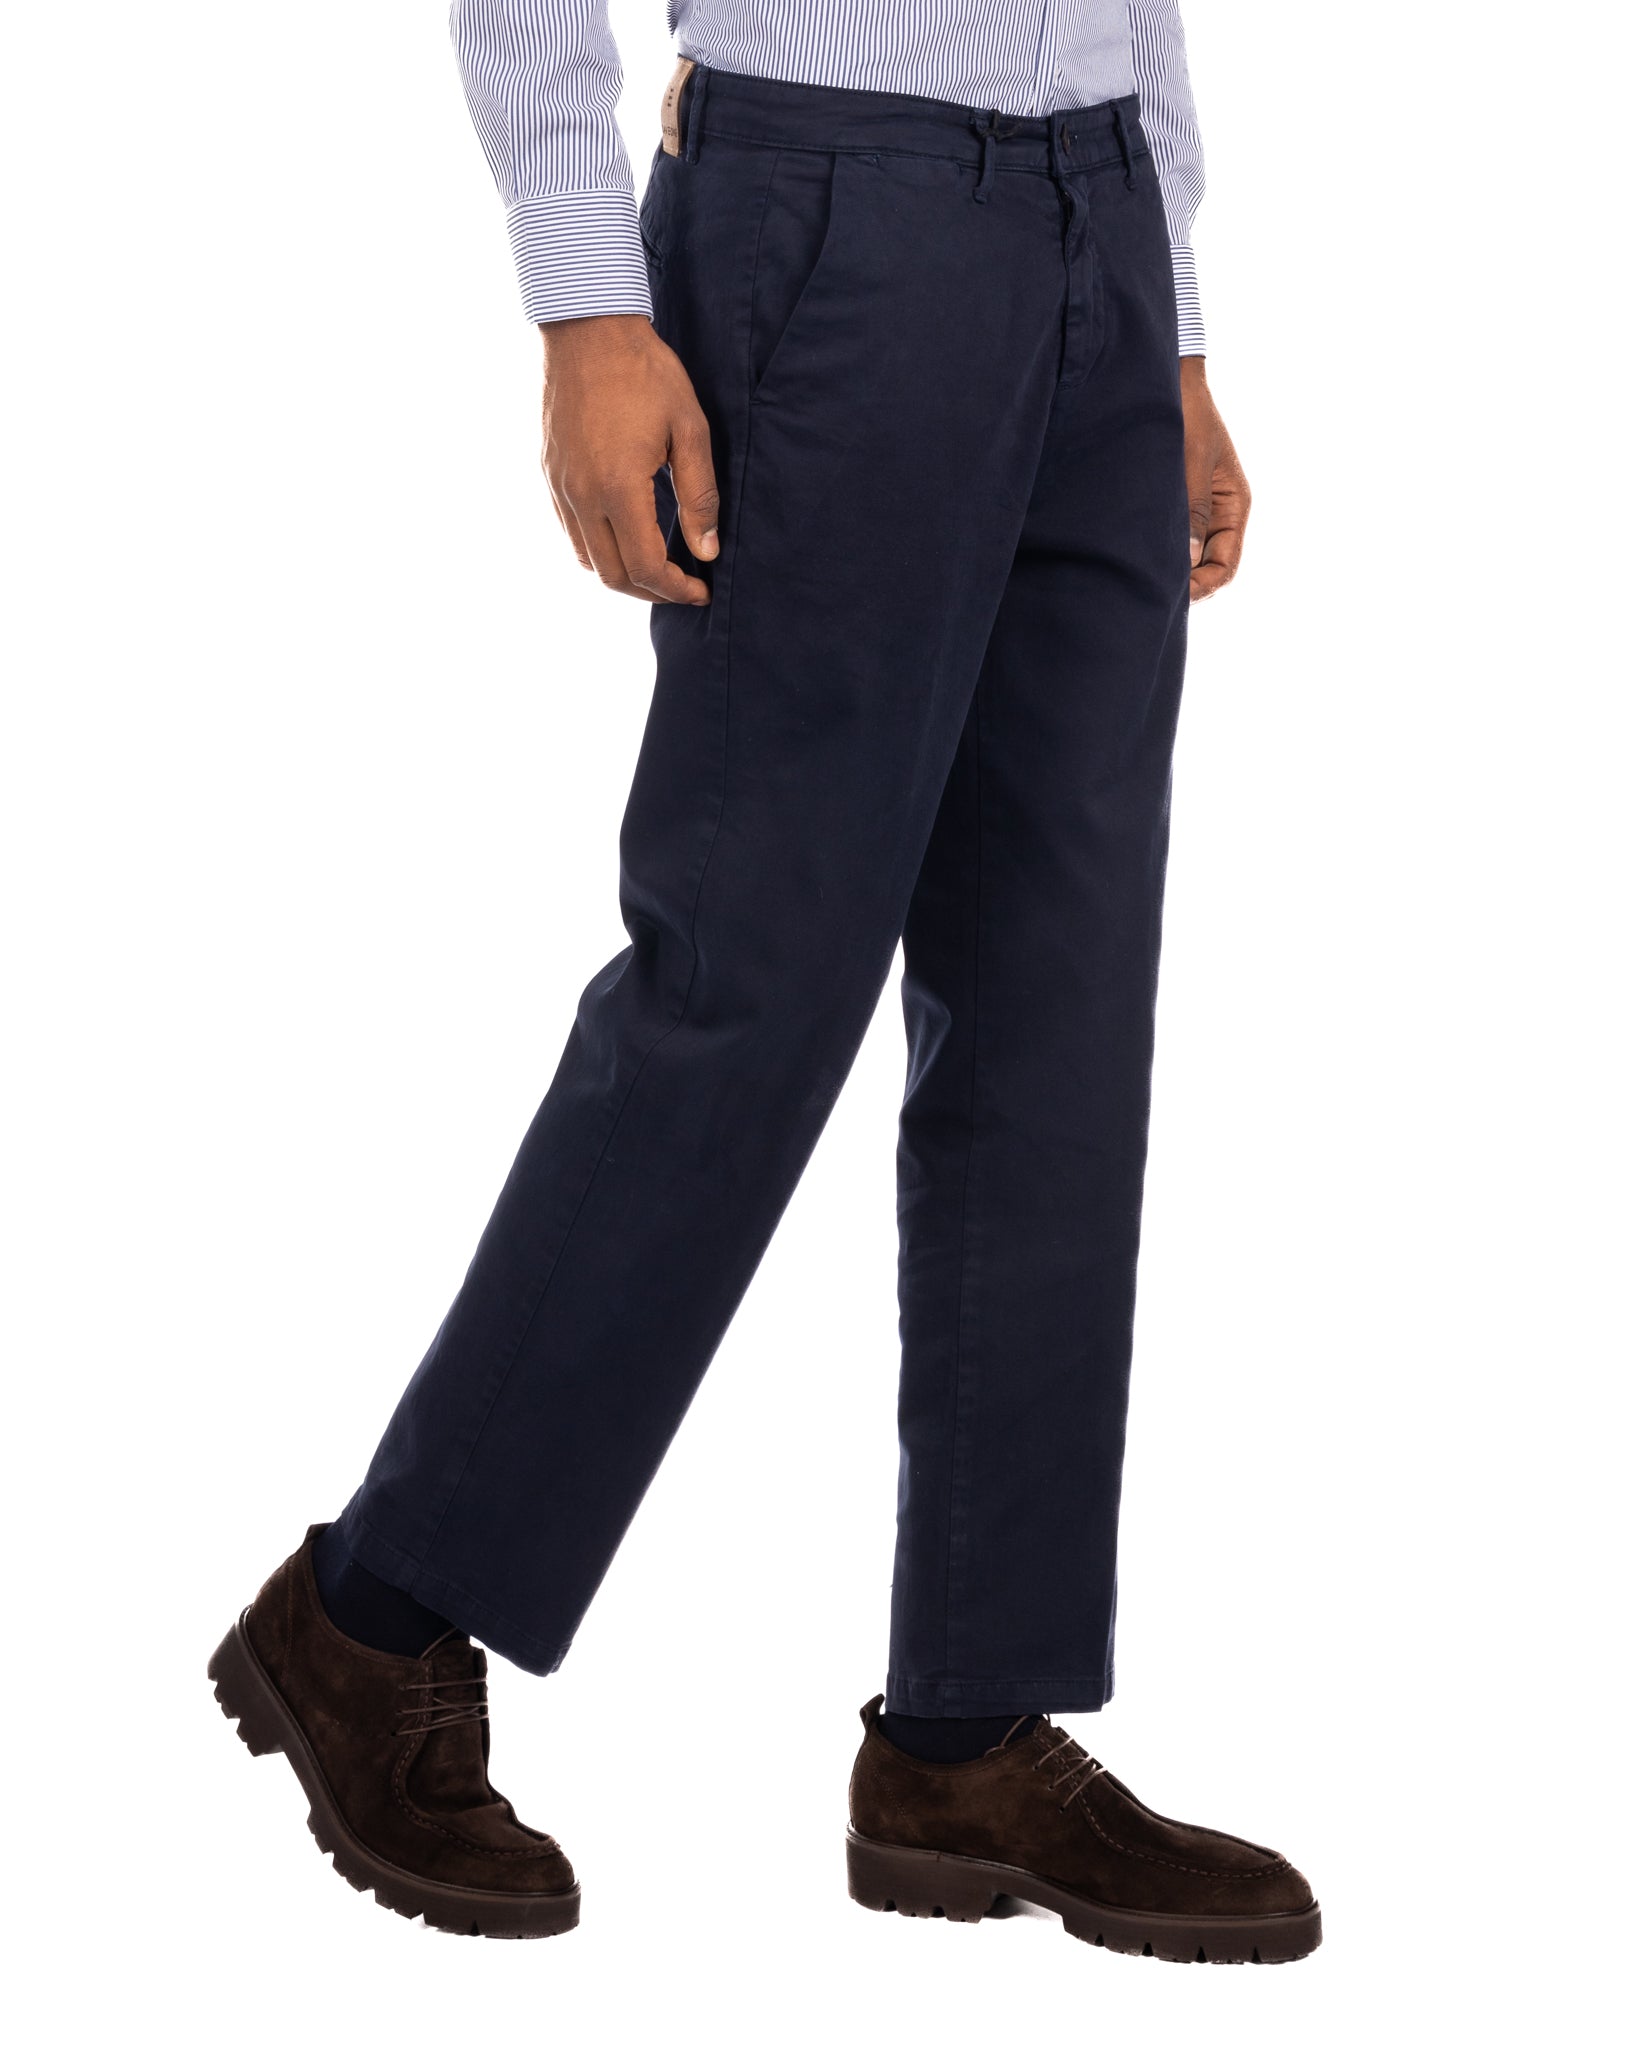 Sorrento - blue wide bottom trousers